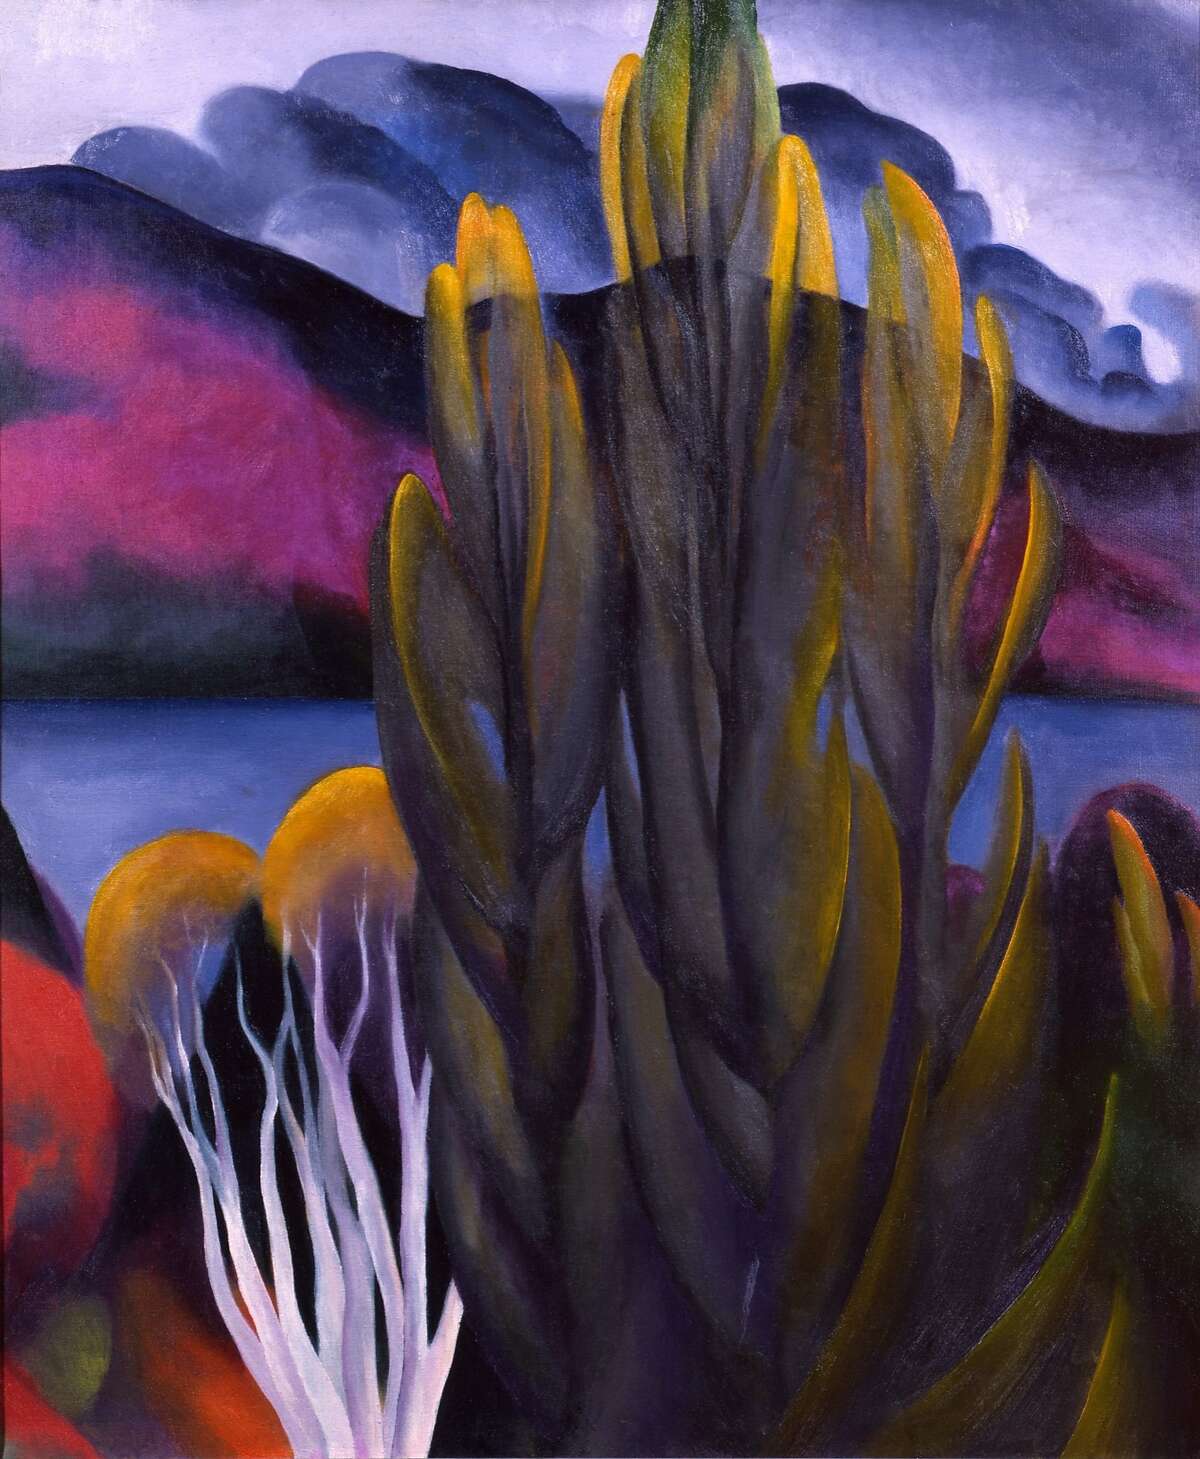 Georgia O'Keeffe, Lake George with White Birch, 1921. Oil on canvas. Private collection. © Georgia O'Keeffe Museum